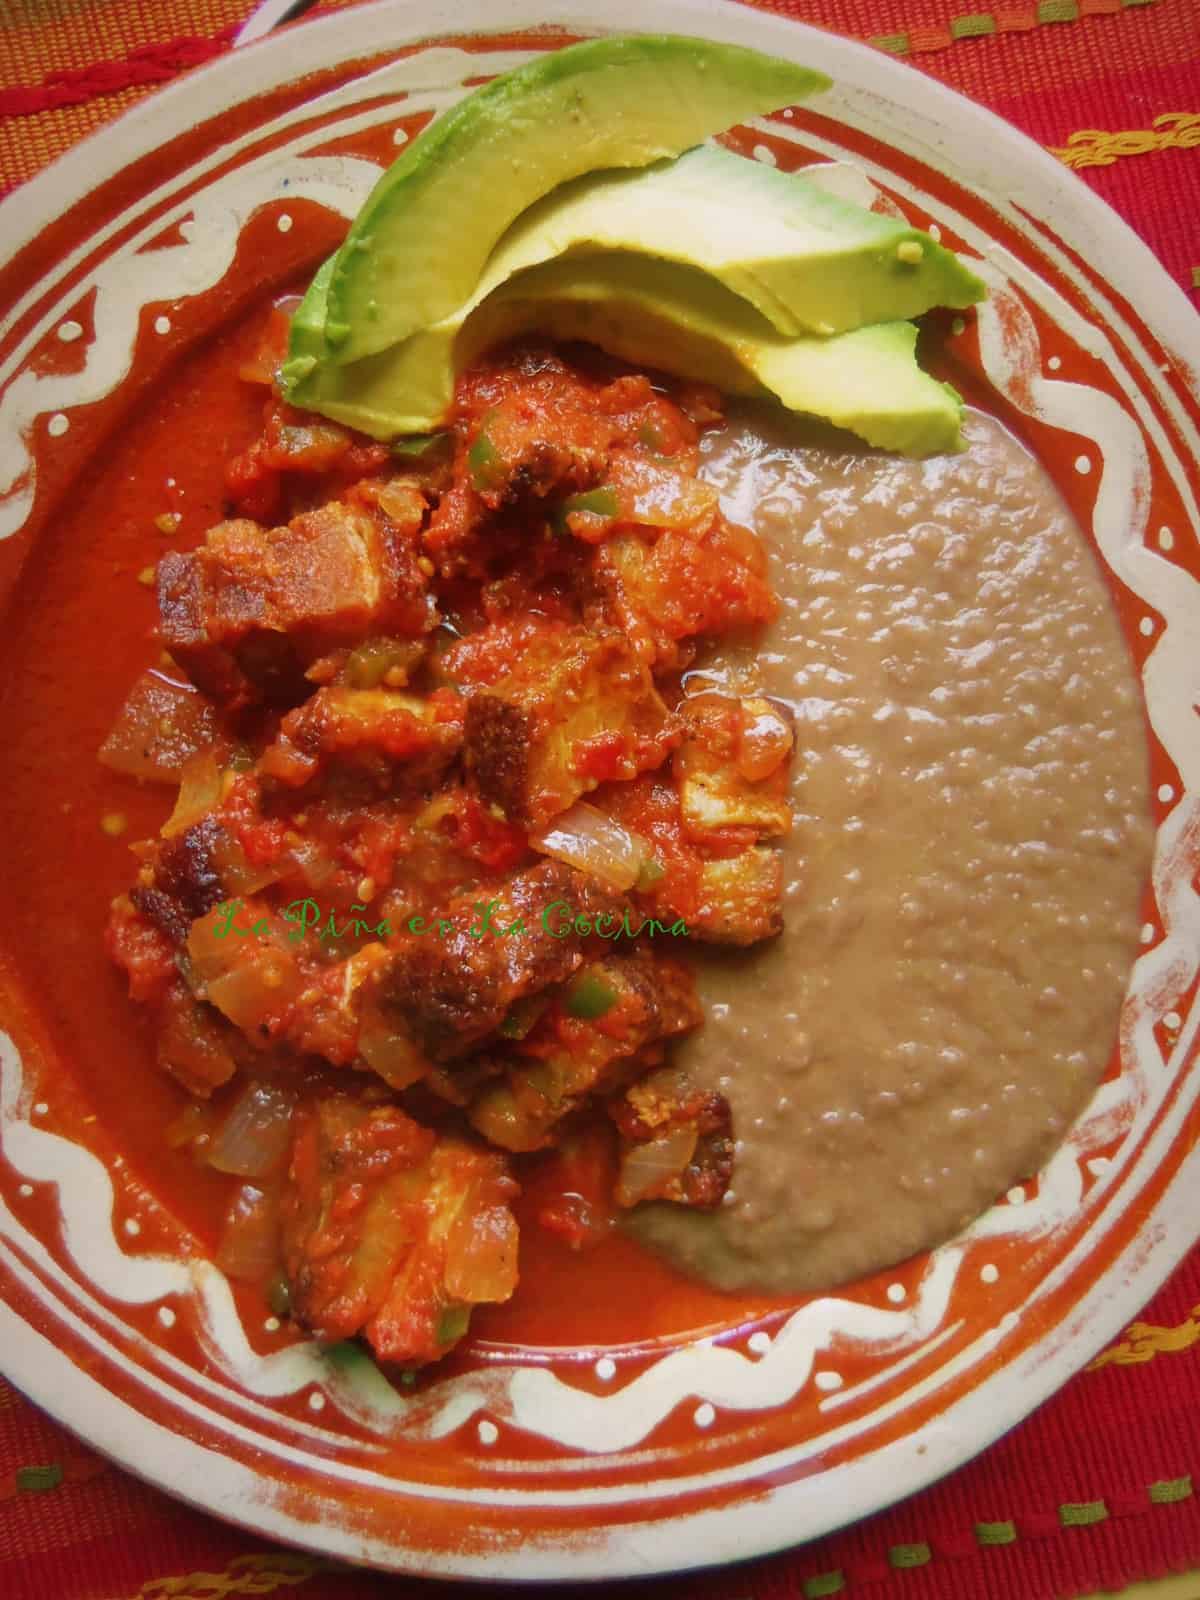 With chicharrones you must have some beans and avocado!